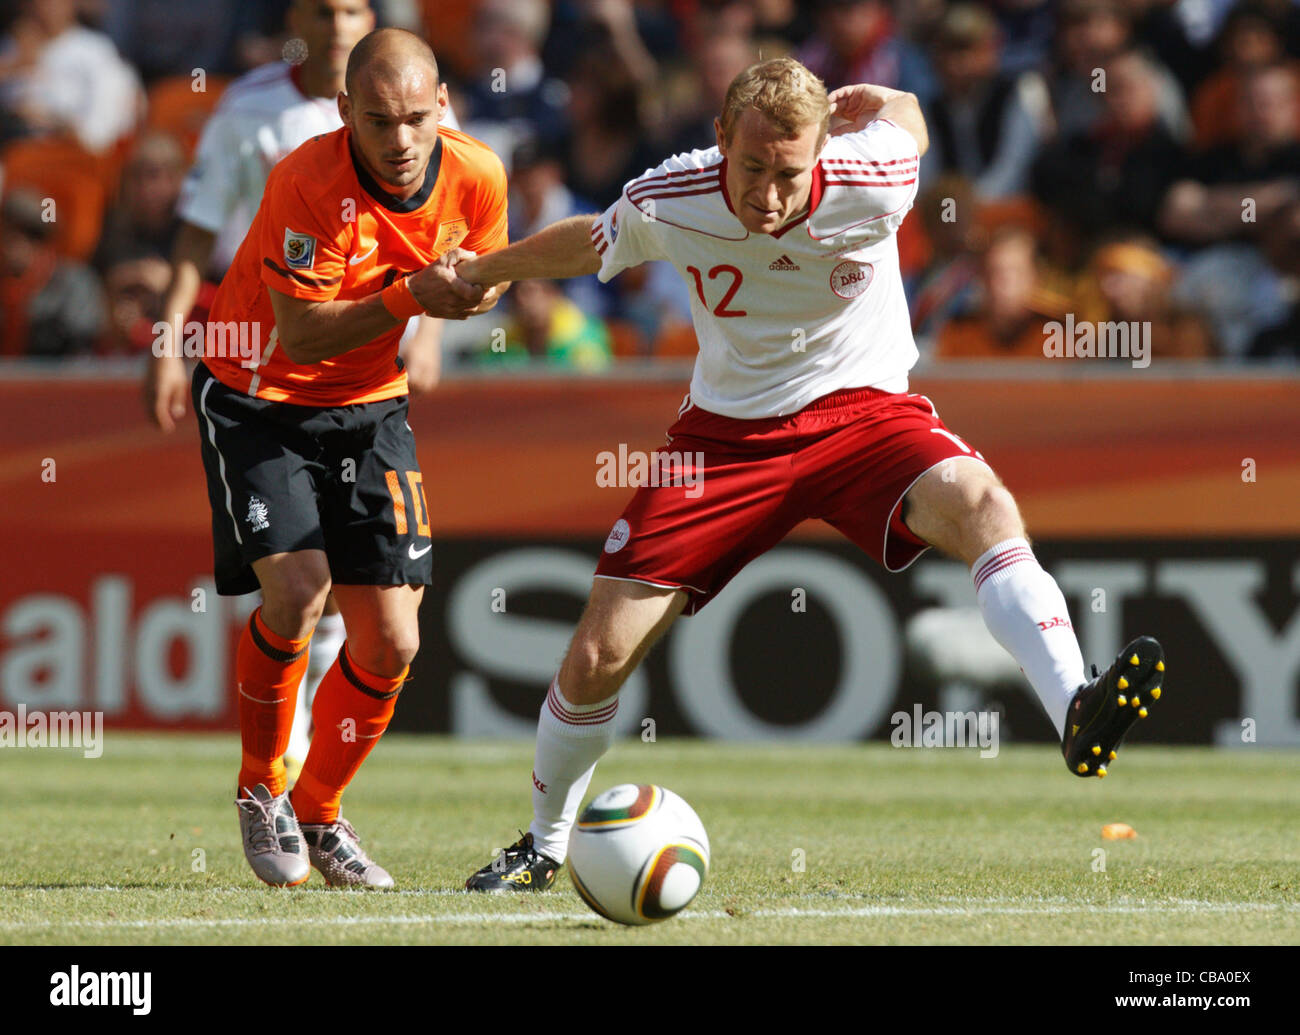 Wesley Sneijder of the Netherlands (L) holds Thomas Kahlenberg of Denmark (R) during a 2010 FIFA World Cup match. Stock Photo